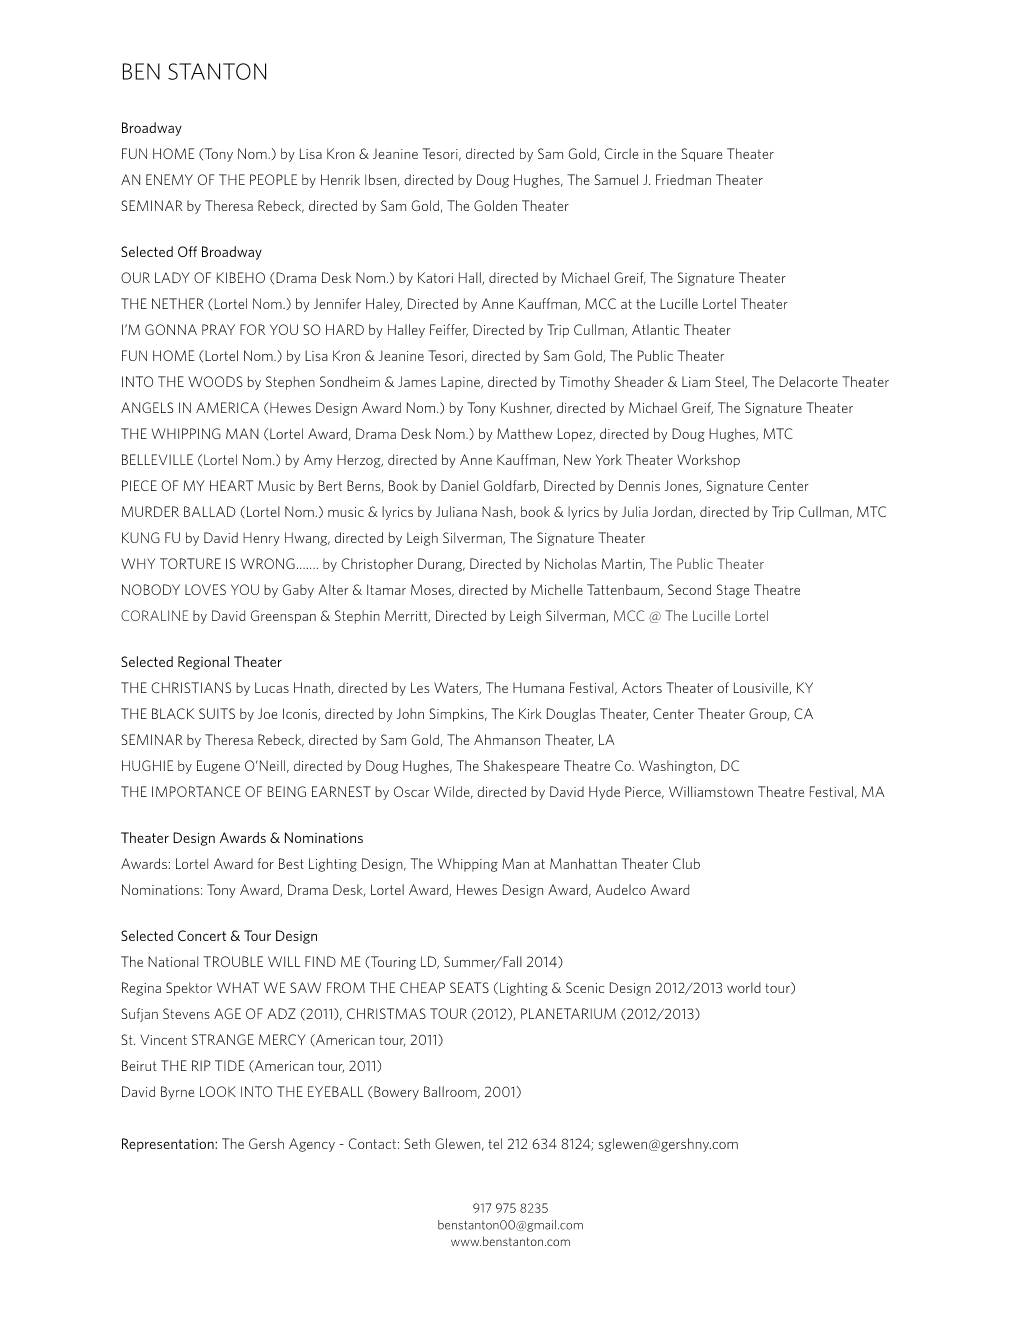 Site Resume May 2015